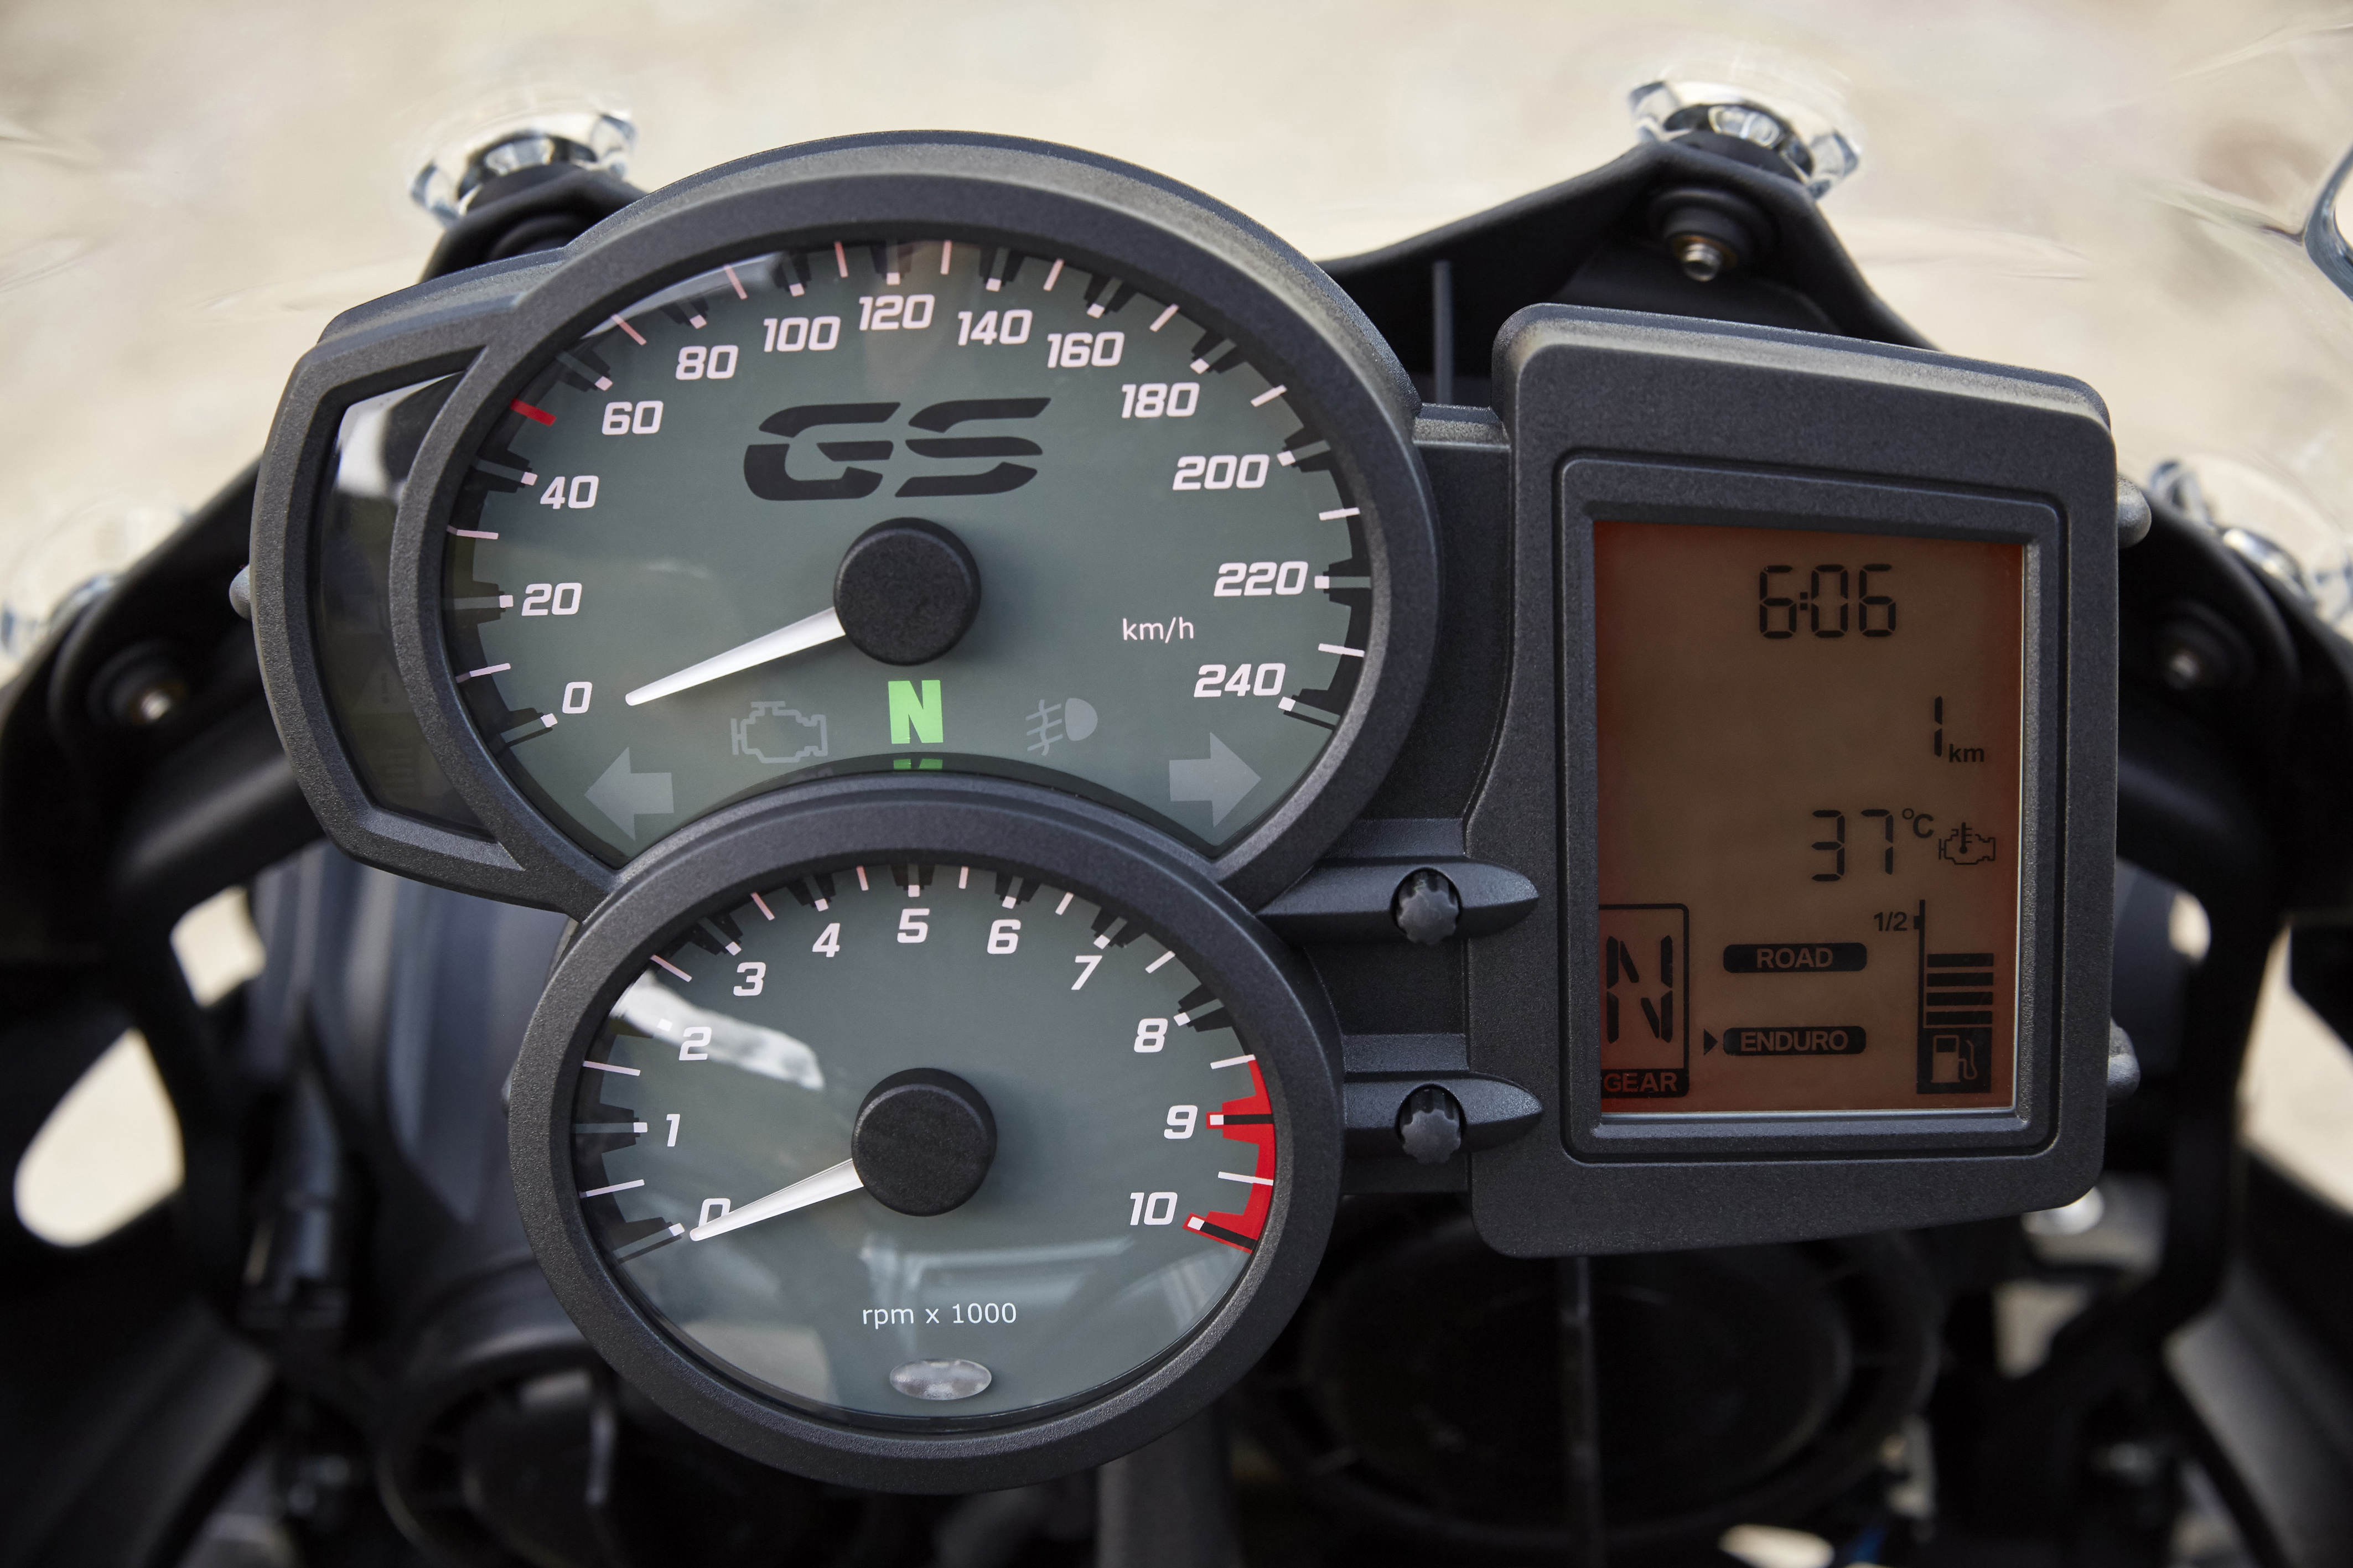 Updates for BMW F700GS and F800GS